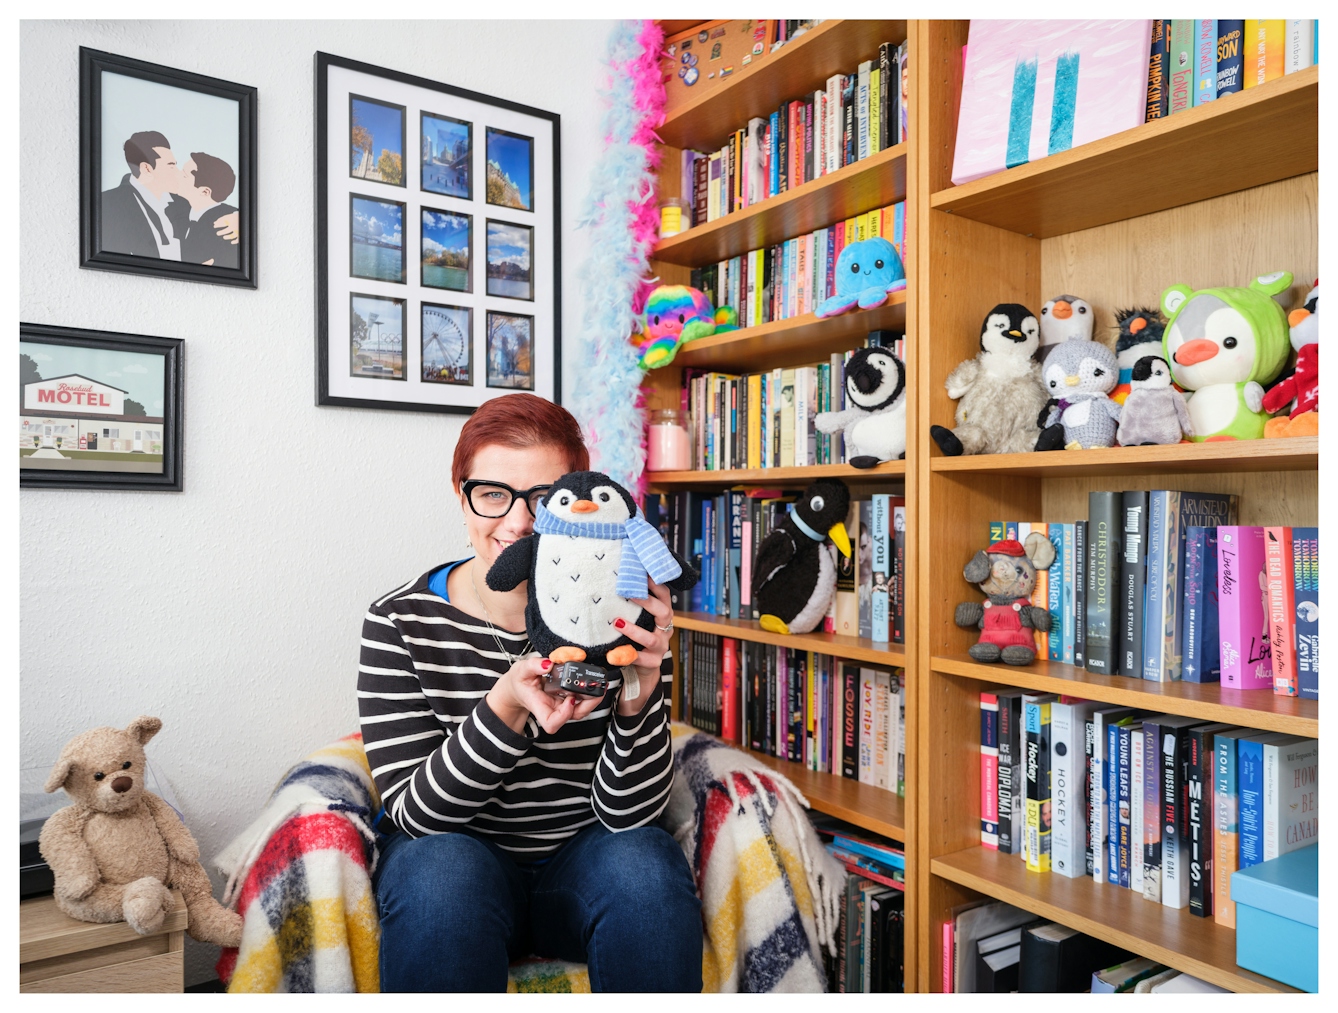 Assisted Self-Portrait of a woman sat leaning forward in a low armchair in a domestic setting. To the right are large book cases filled with books and dotted with soft toy animals. She is hiding a small soft toy penguin up to her face, obscuring the left hand side. She is smiling broadly and hold the remote trigger in her right hand that she used to capture the image.